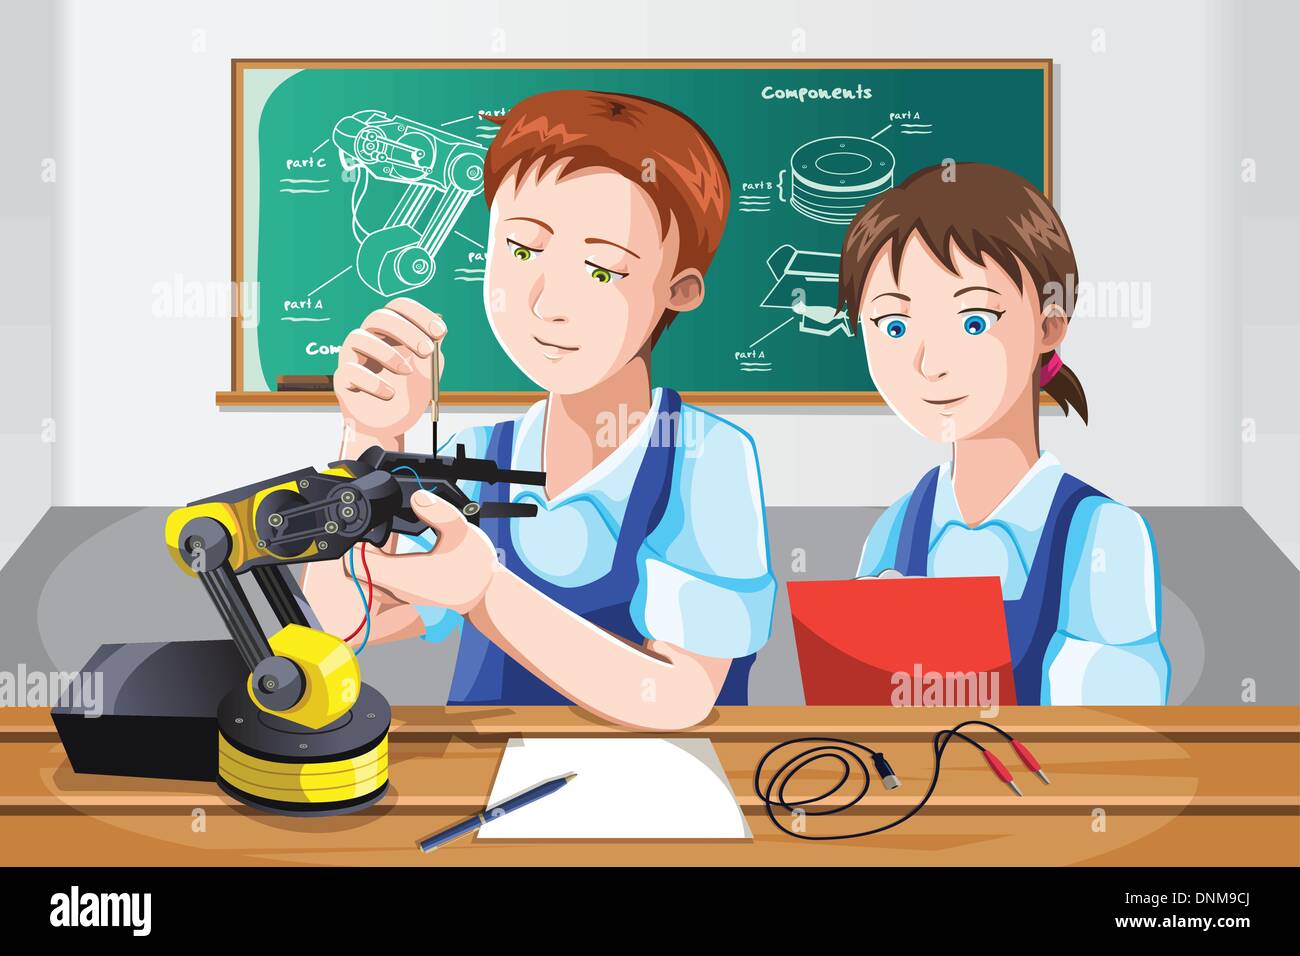 A vector illustration of students building a robot in class Stock Vector